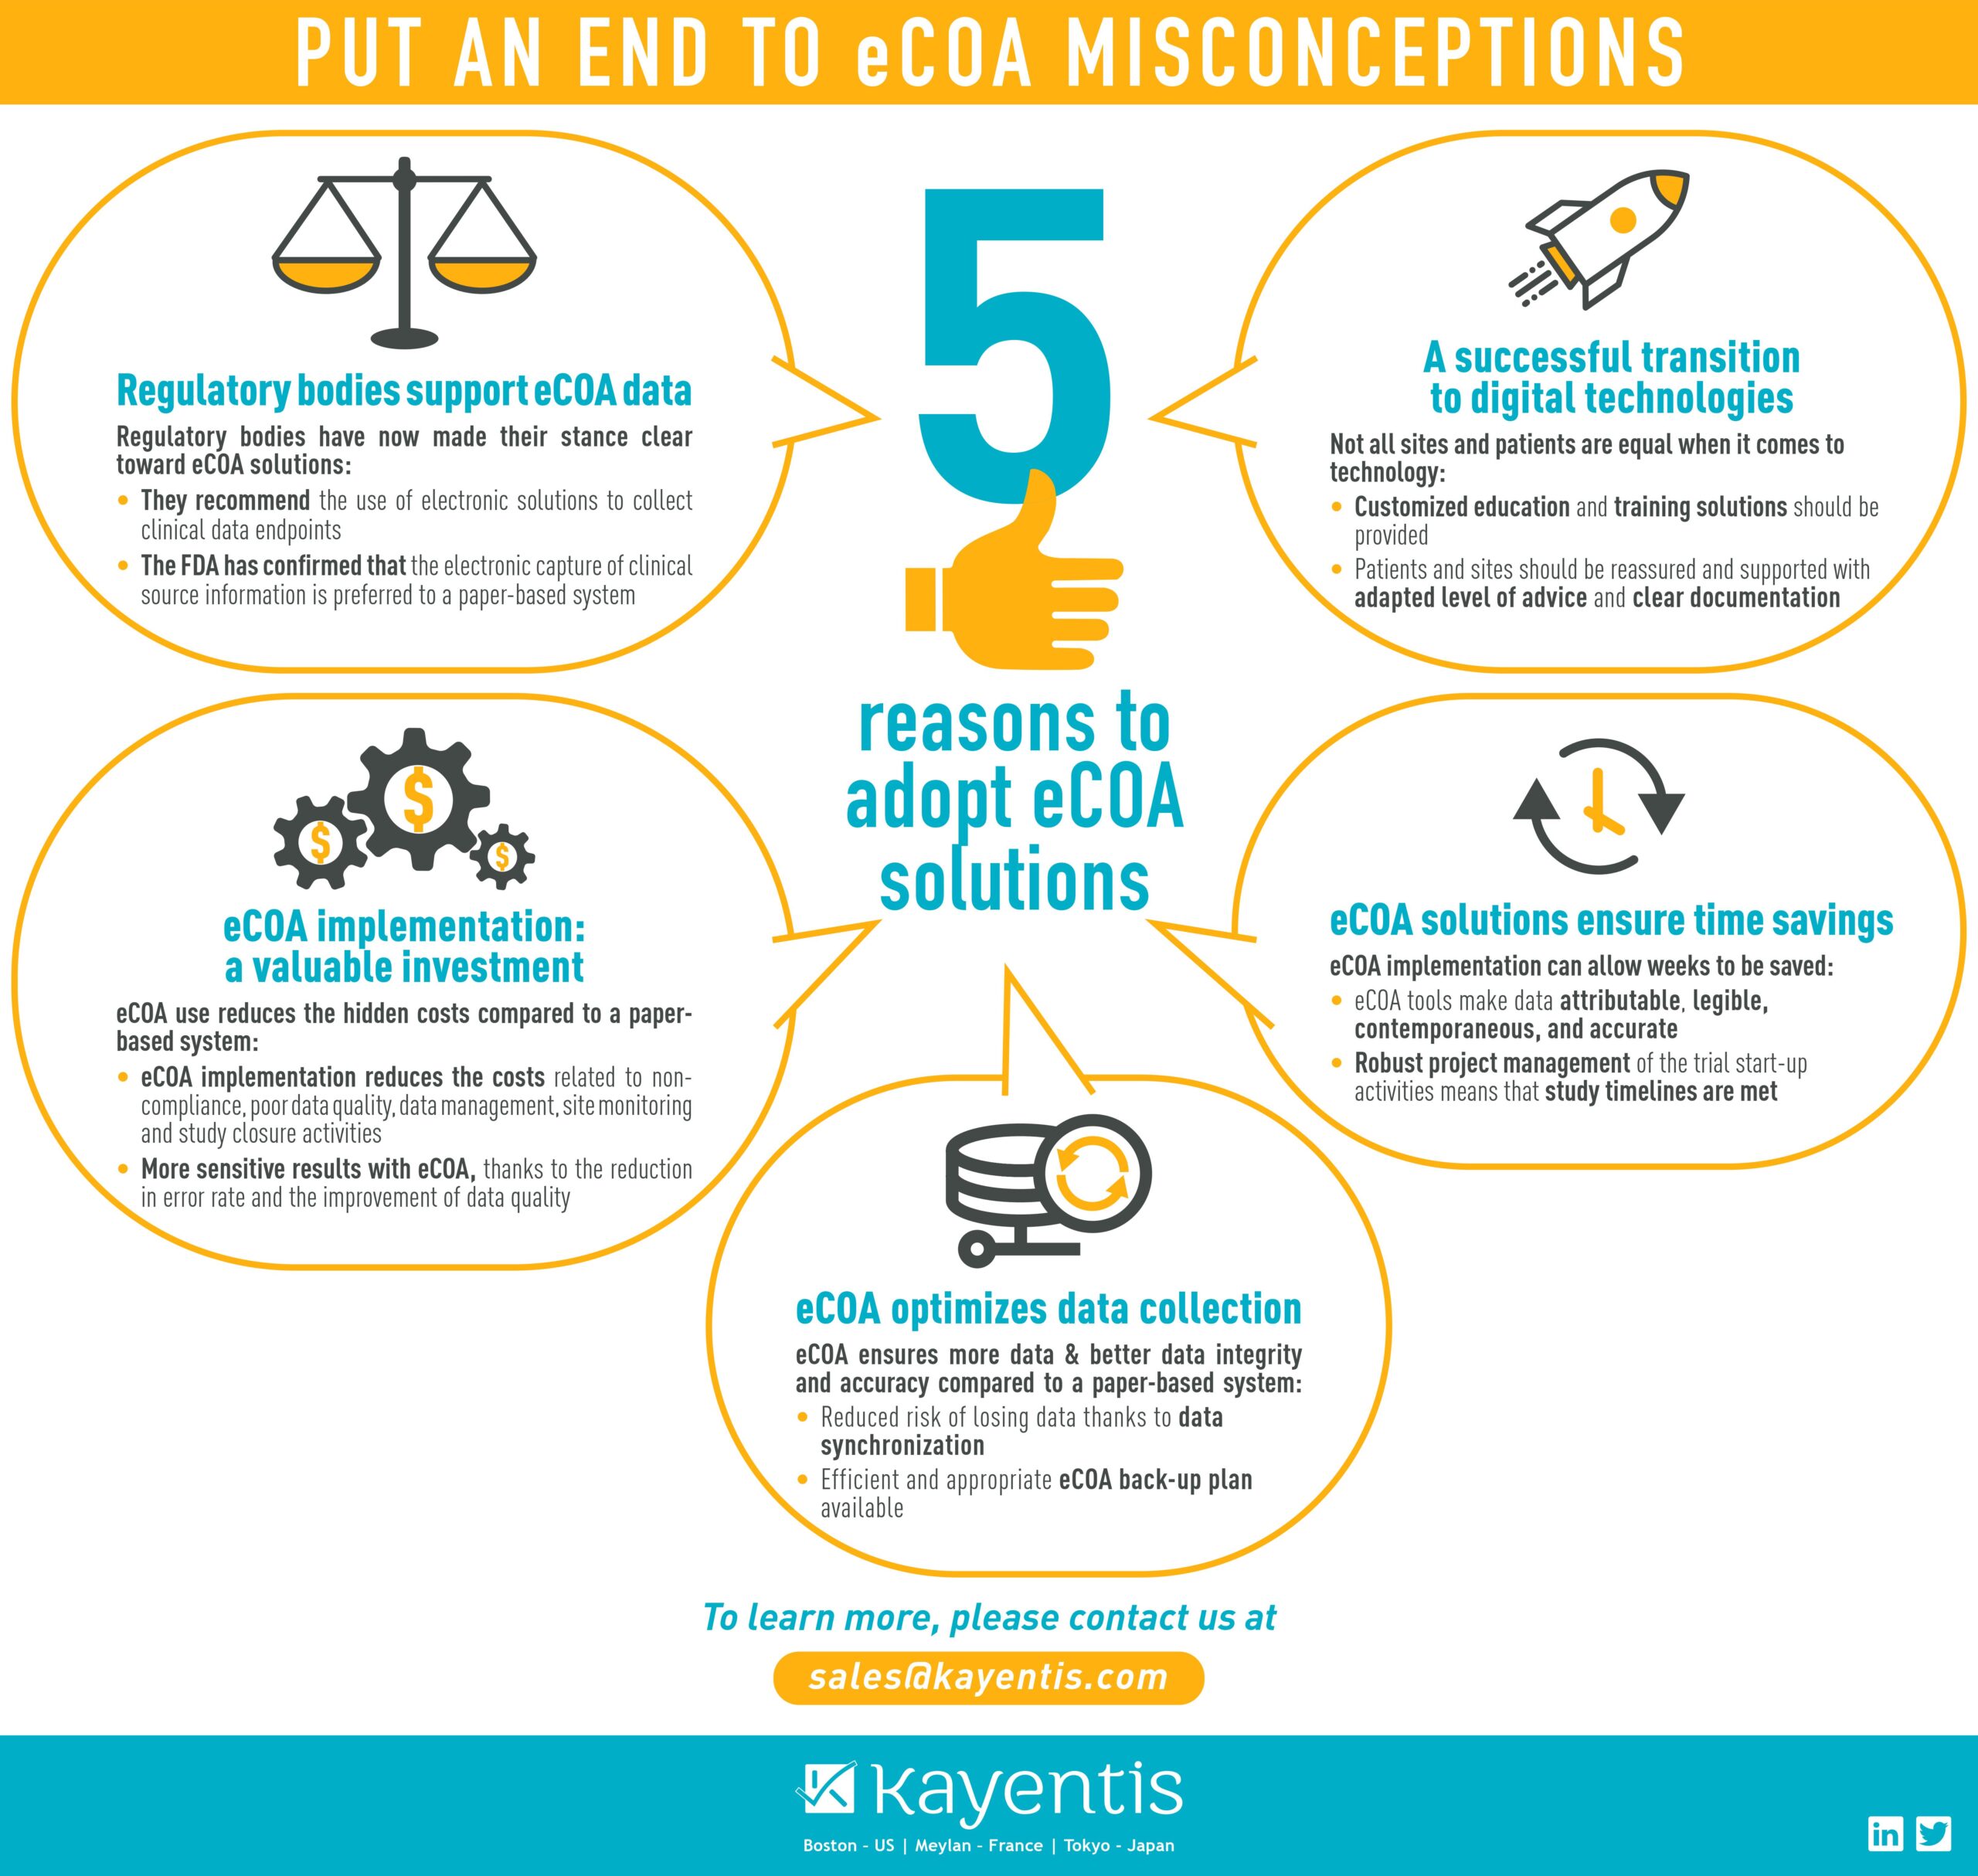 5 reasons to adopt eCOA solutions